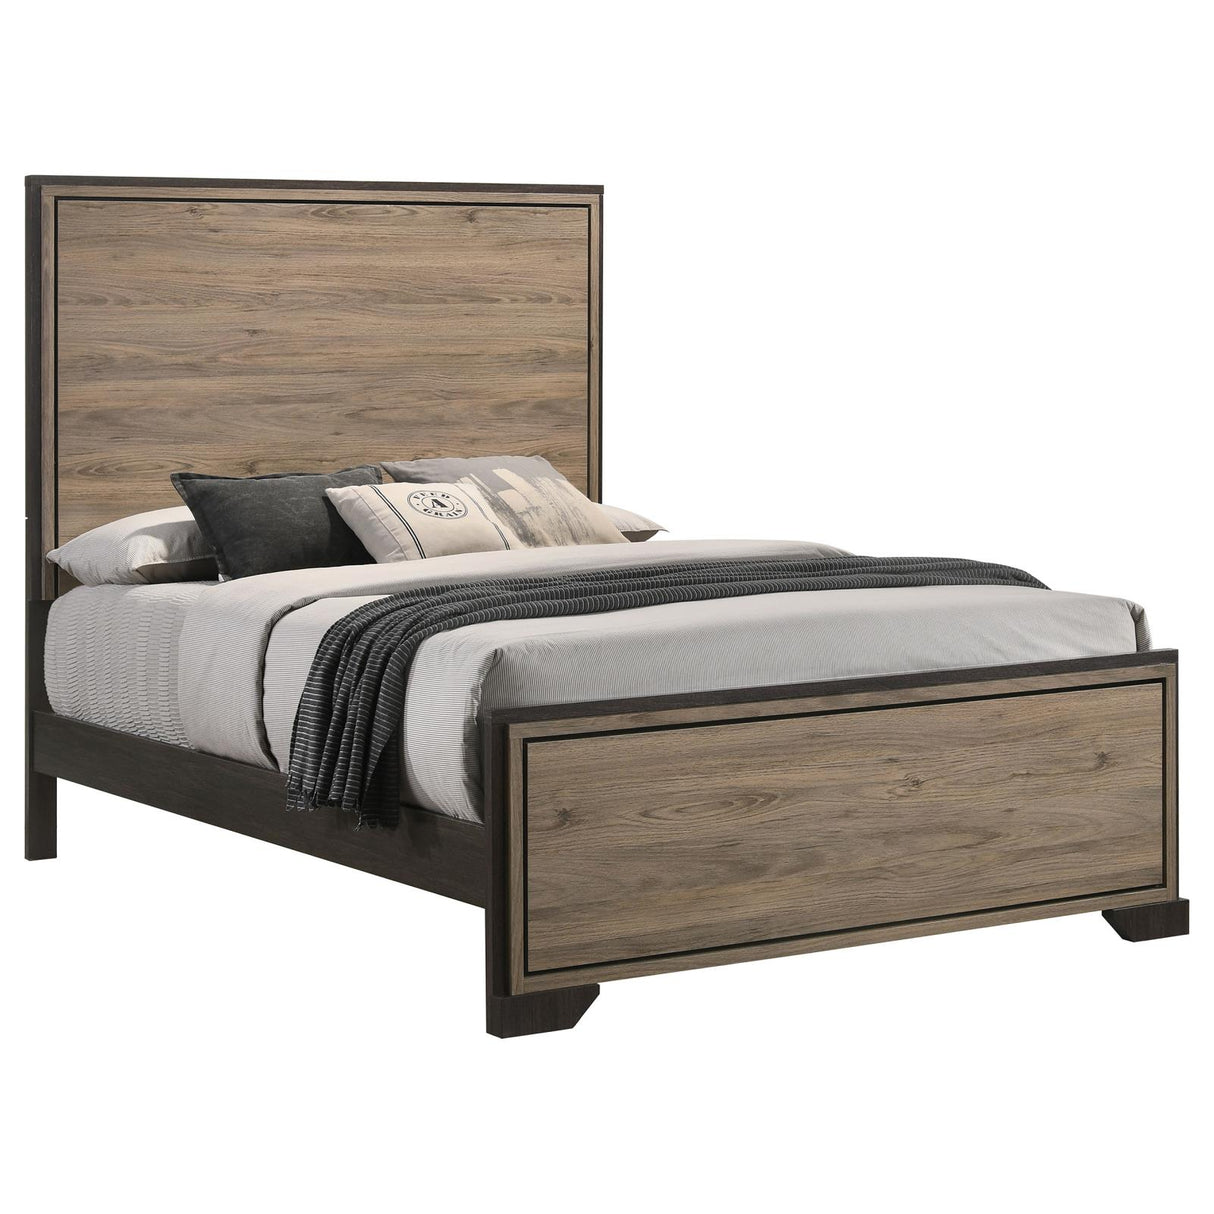 Baker Panel California King Bed Brown and Light Taupe - 224461KW - Luna Furniture